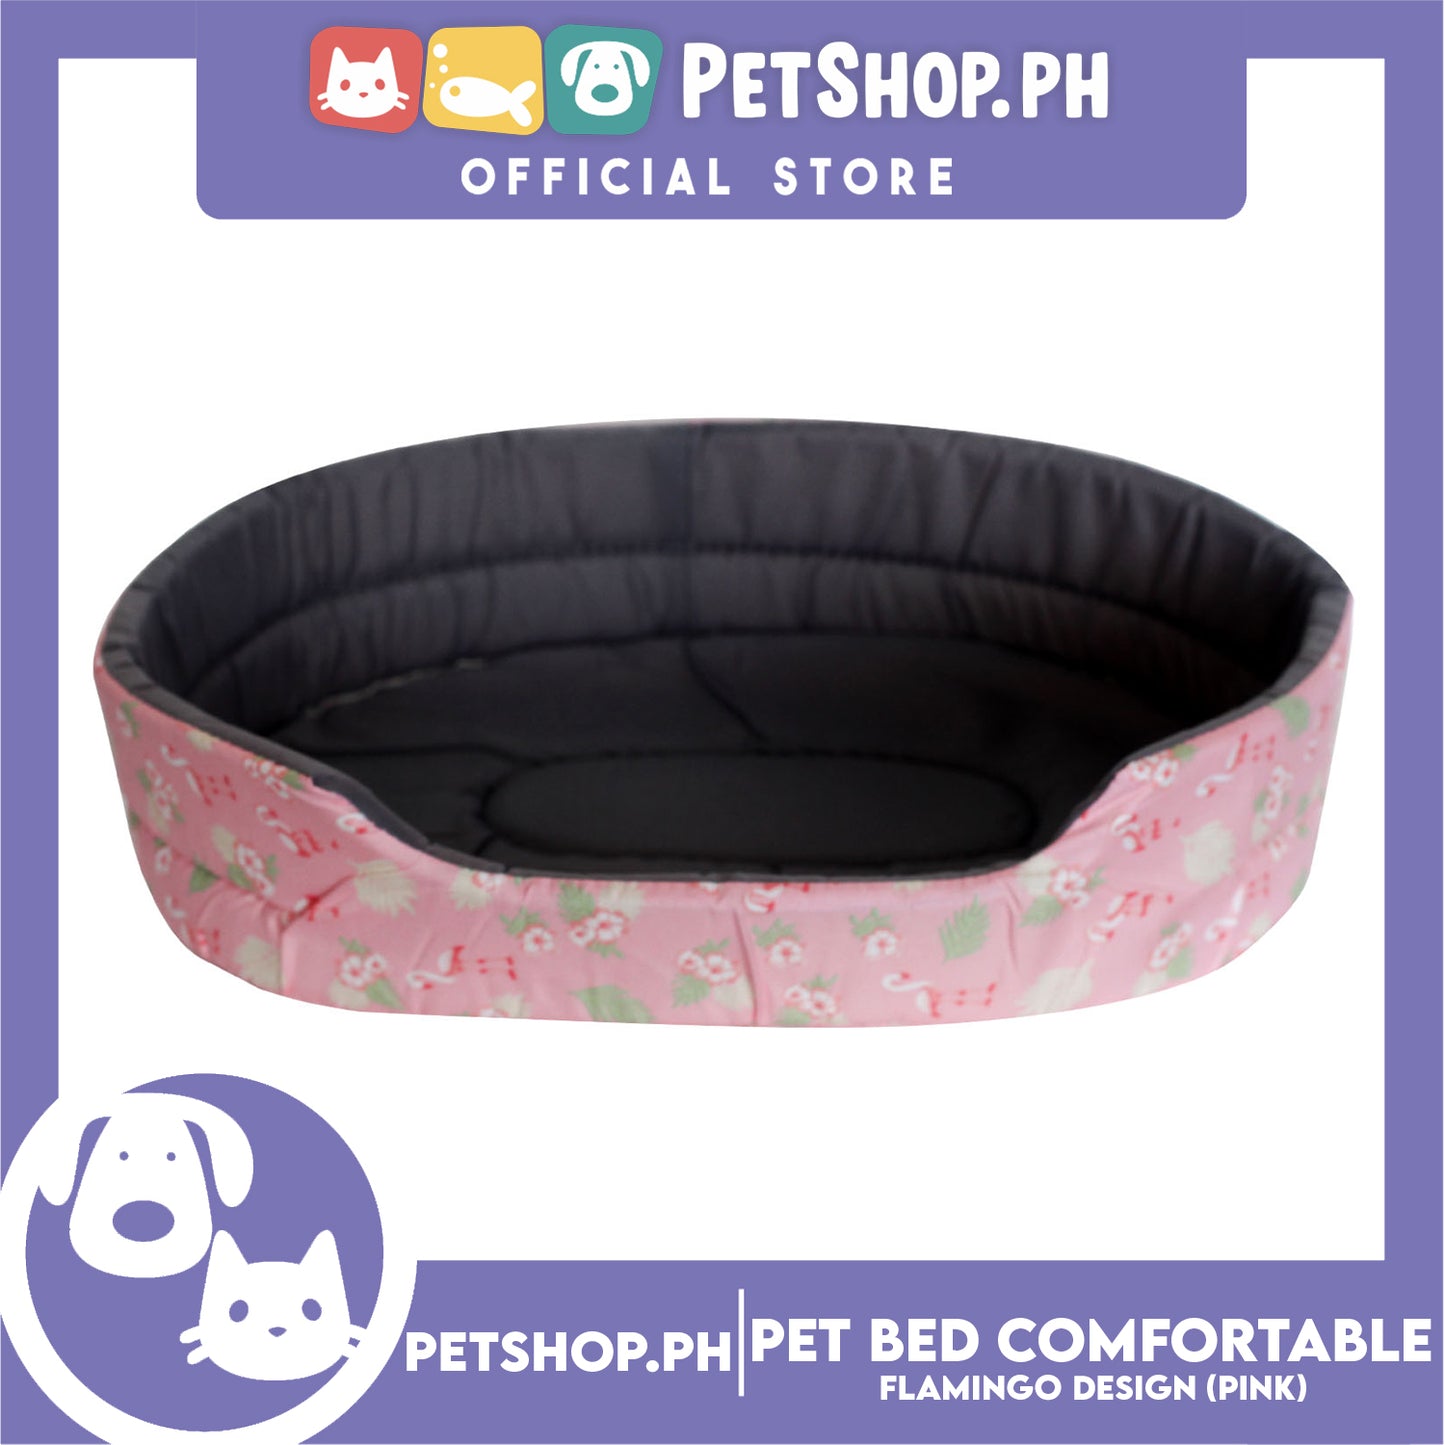 Pet Bed Comfortable Sleeping Bed with Flamingo Design 50x40x12cm for Dogs & Cats Pink